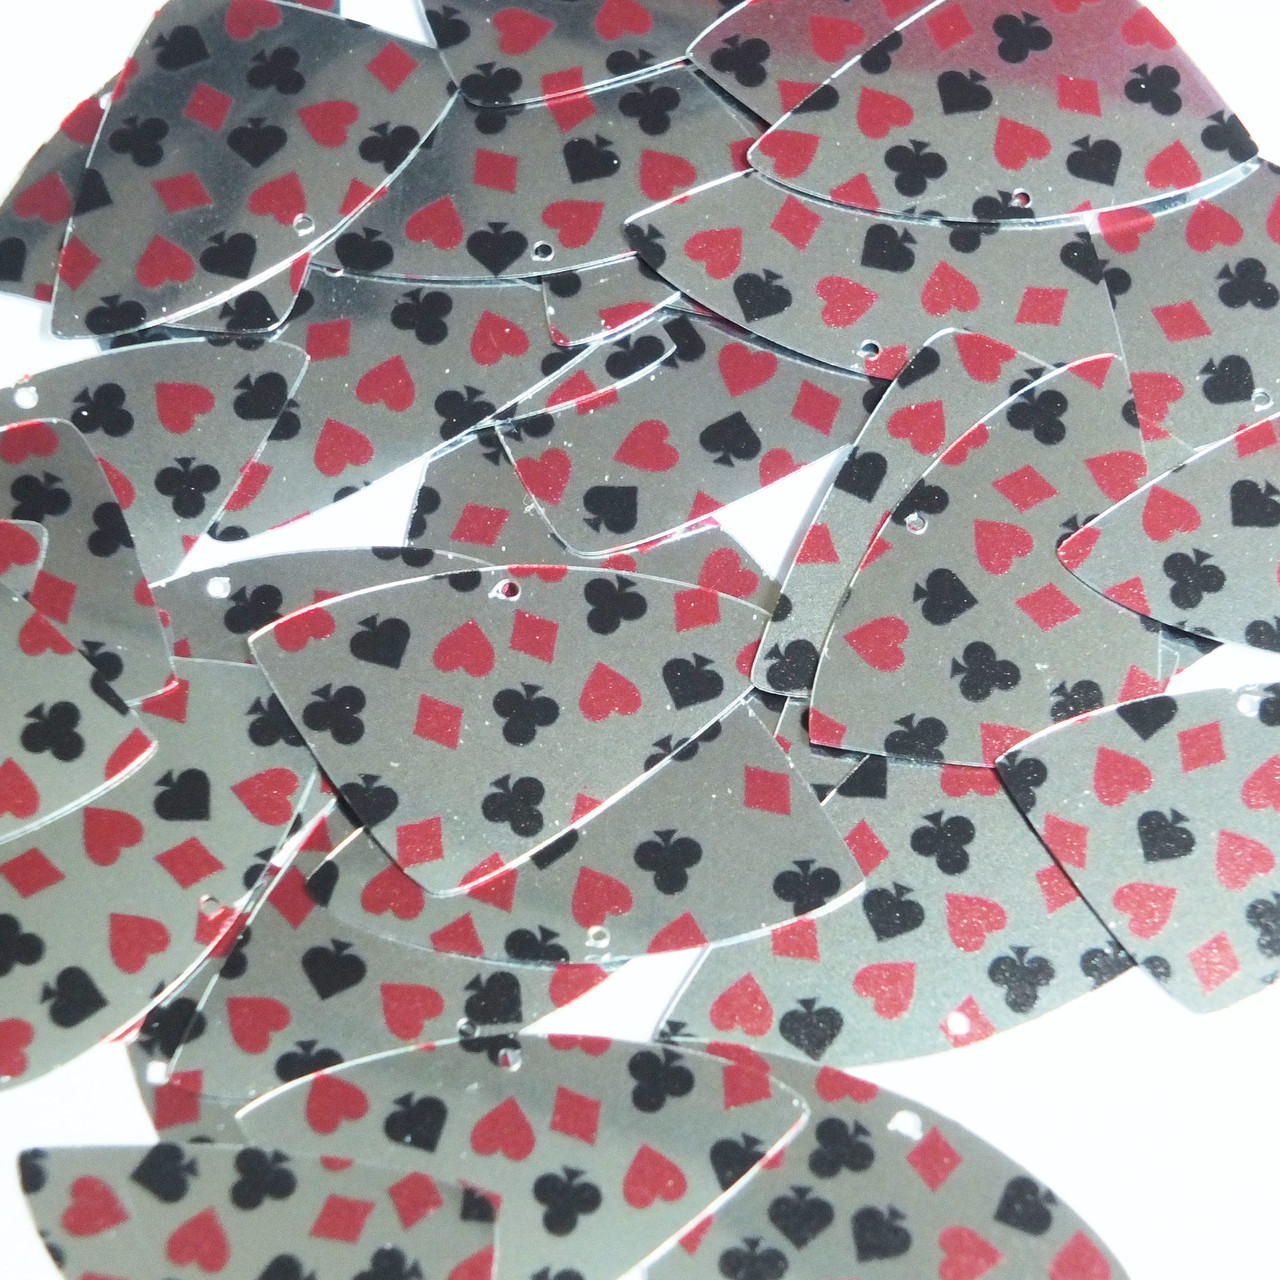 Fishscale Fin Sequins 1.5" Playing Card Clubs Hearts Spades Diamonds Silver Metallic